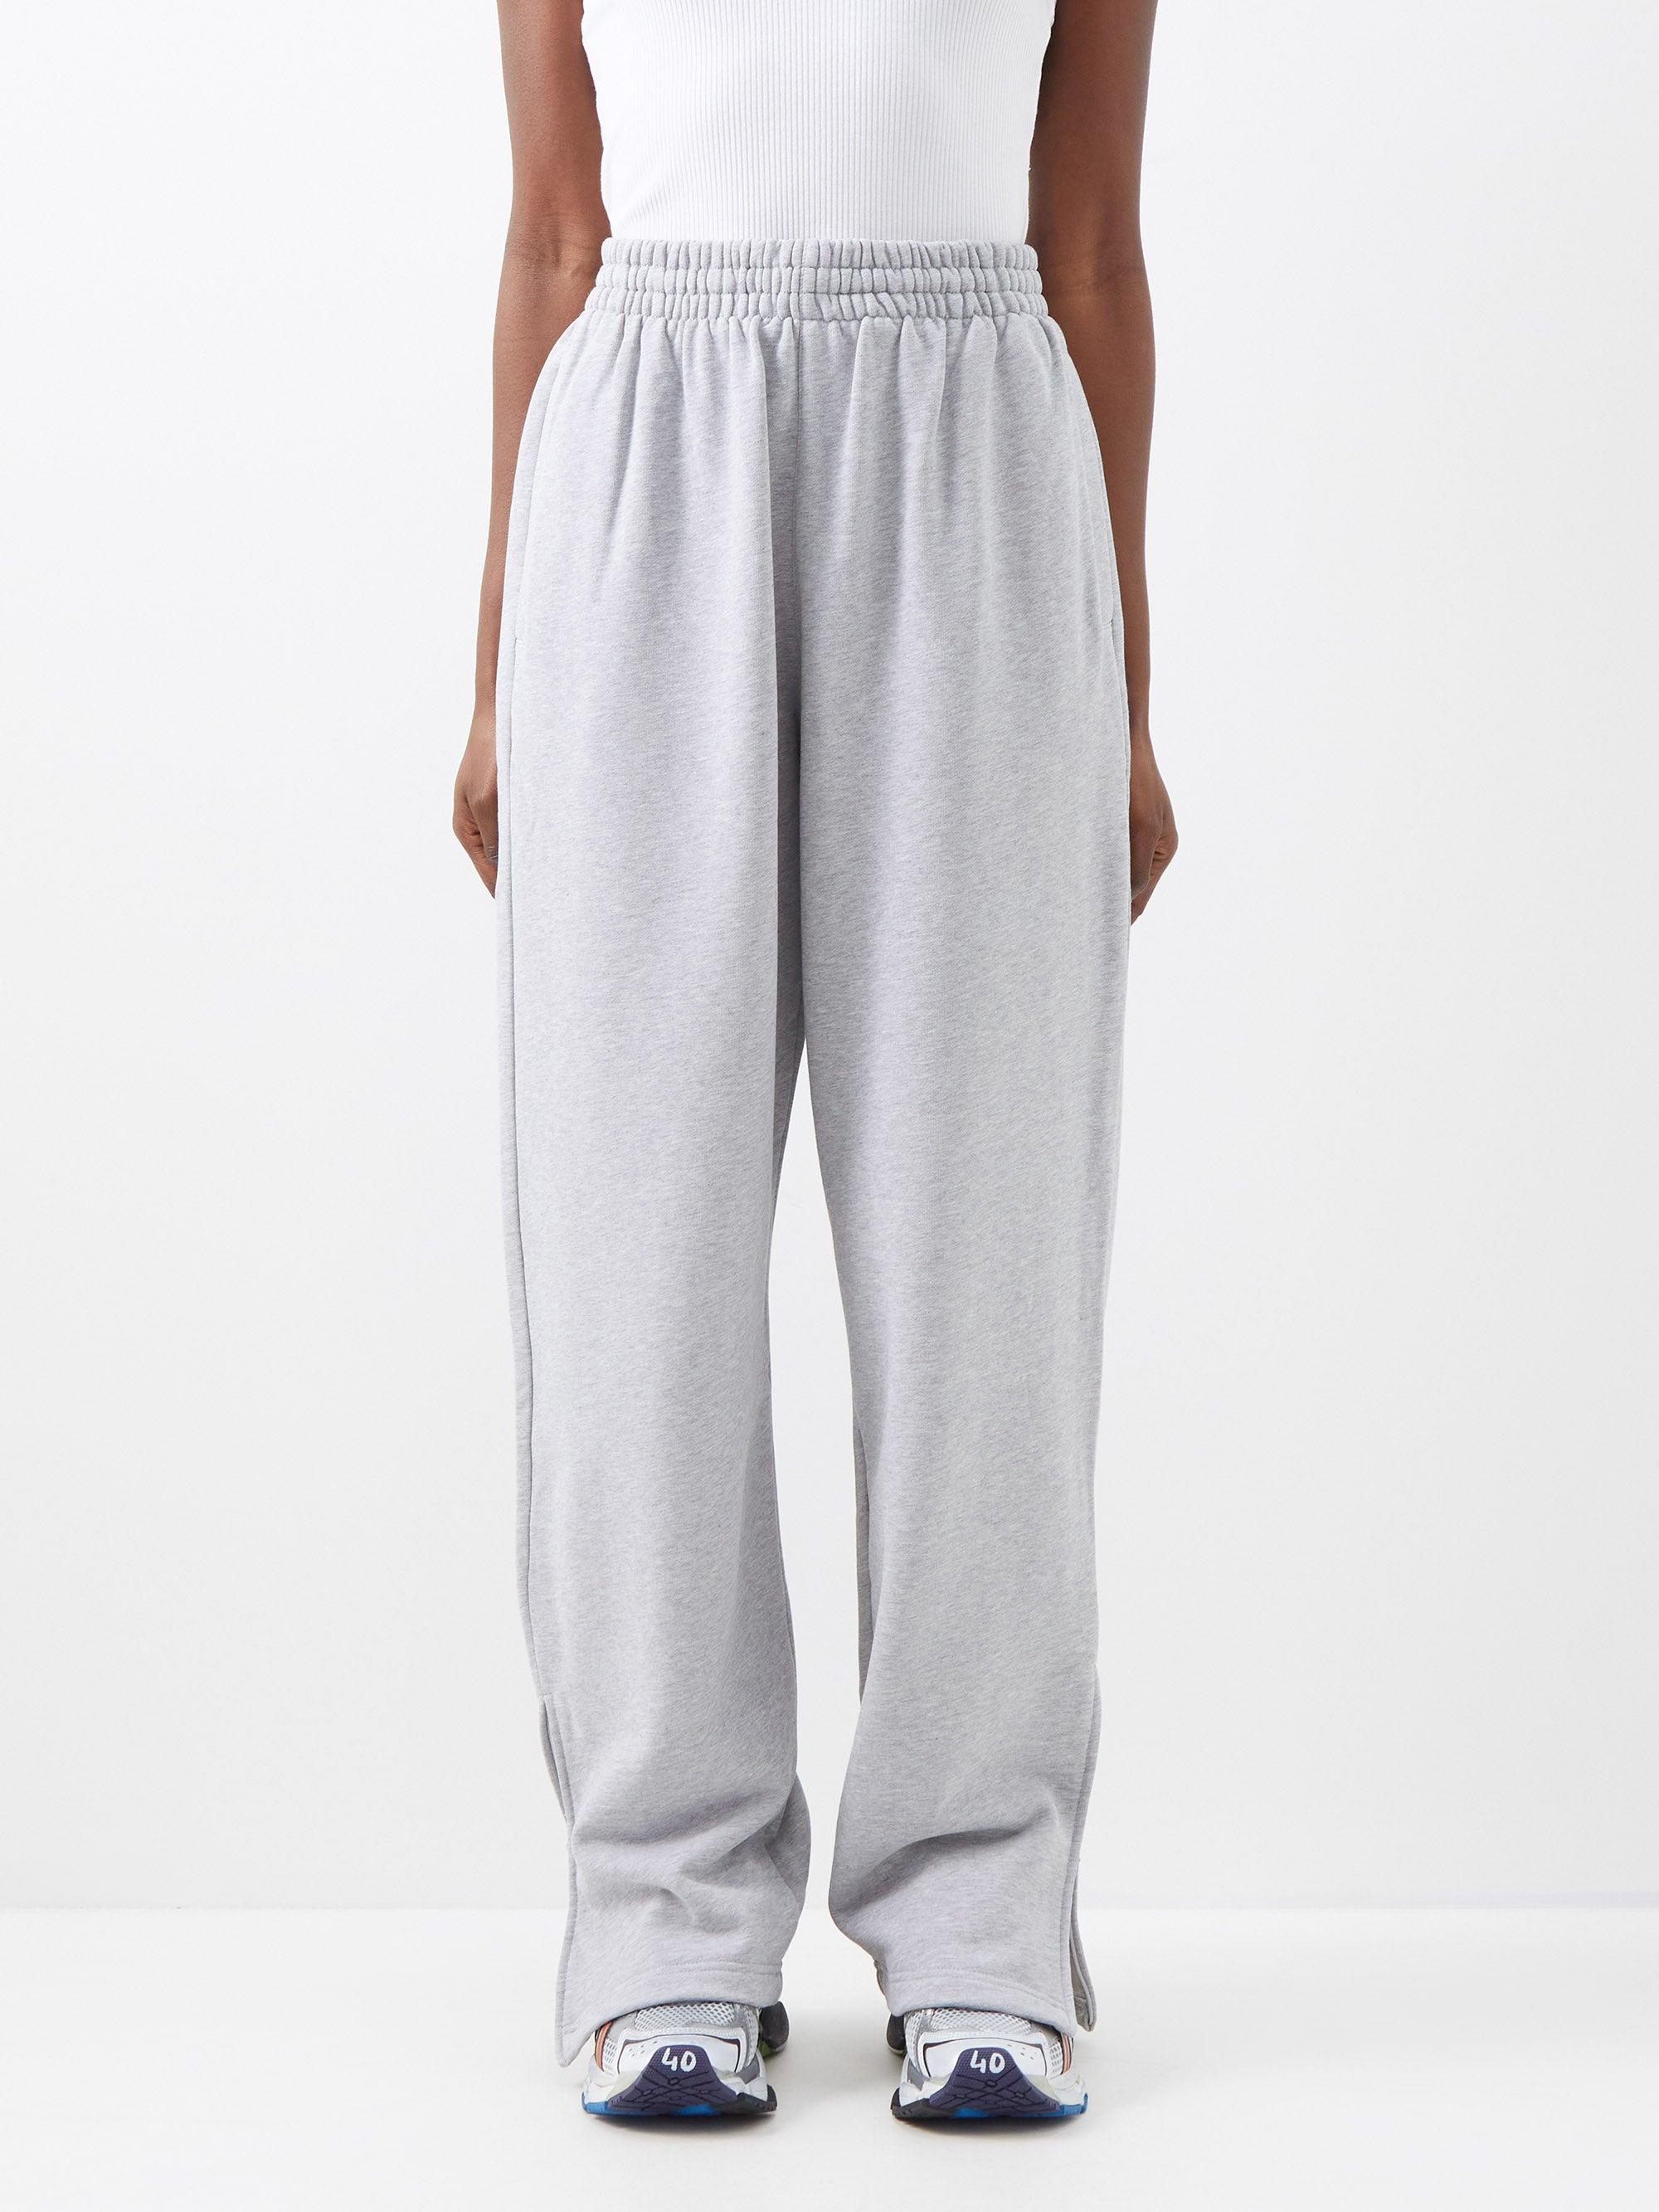 Wardrobe NYC X Hailey Bieber Cotton-jersey Track Pants in Gray | Lyst